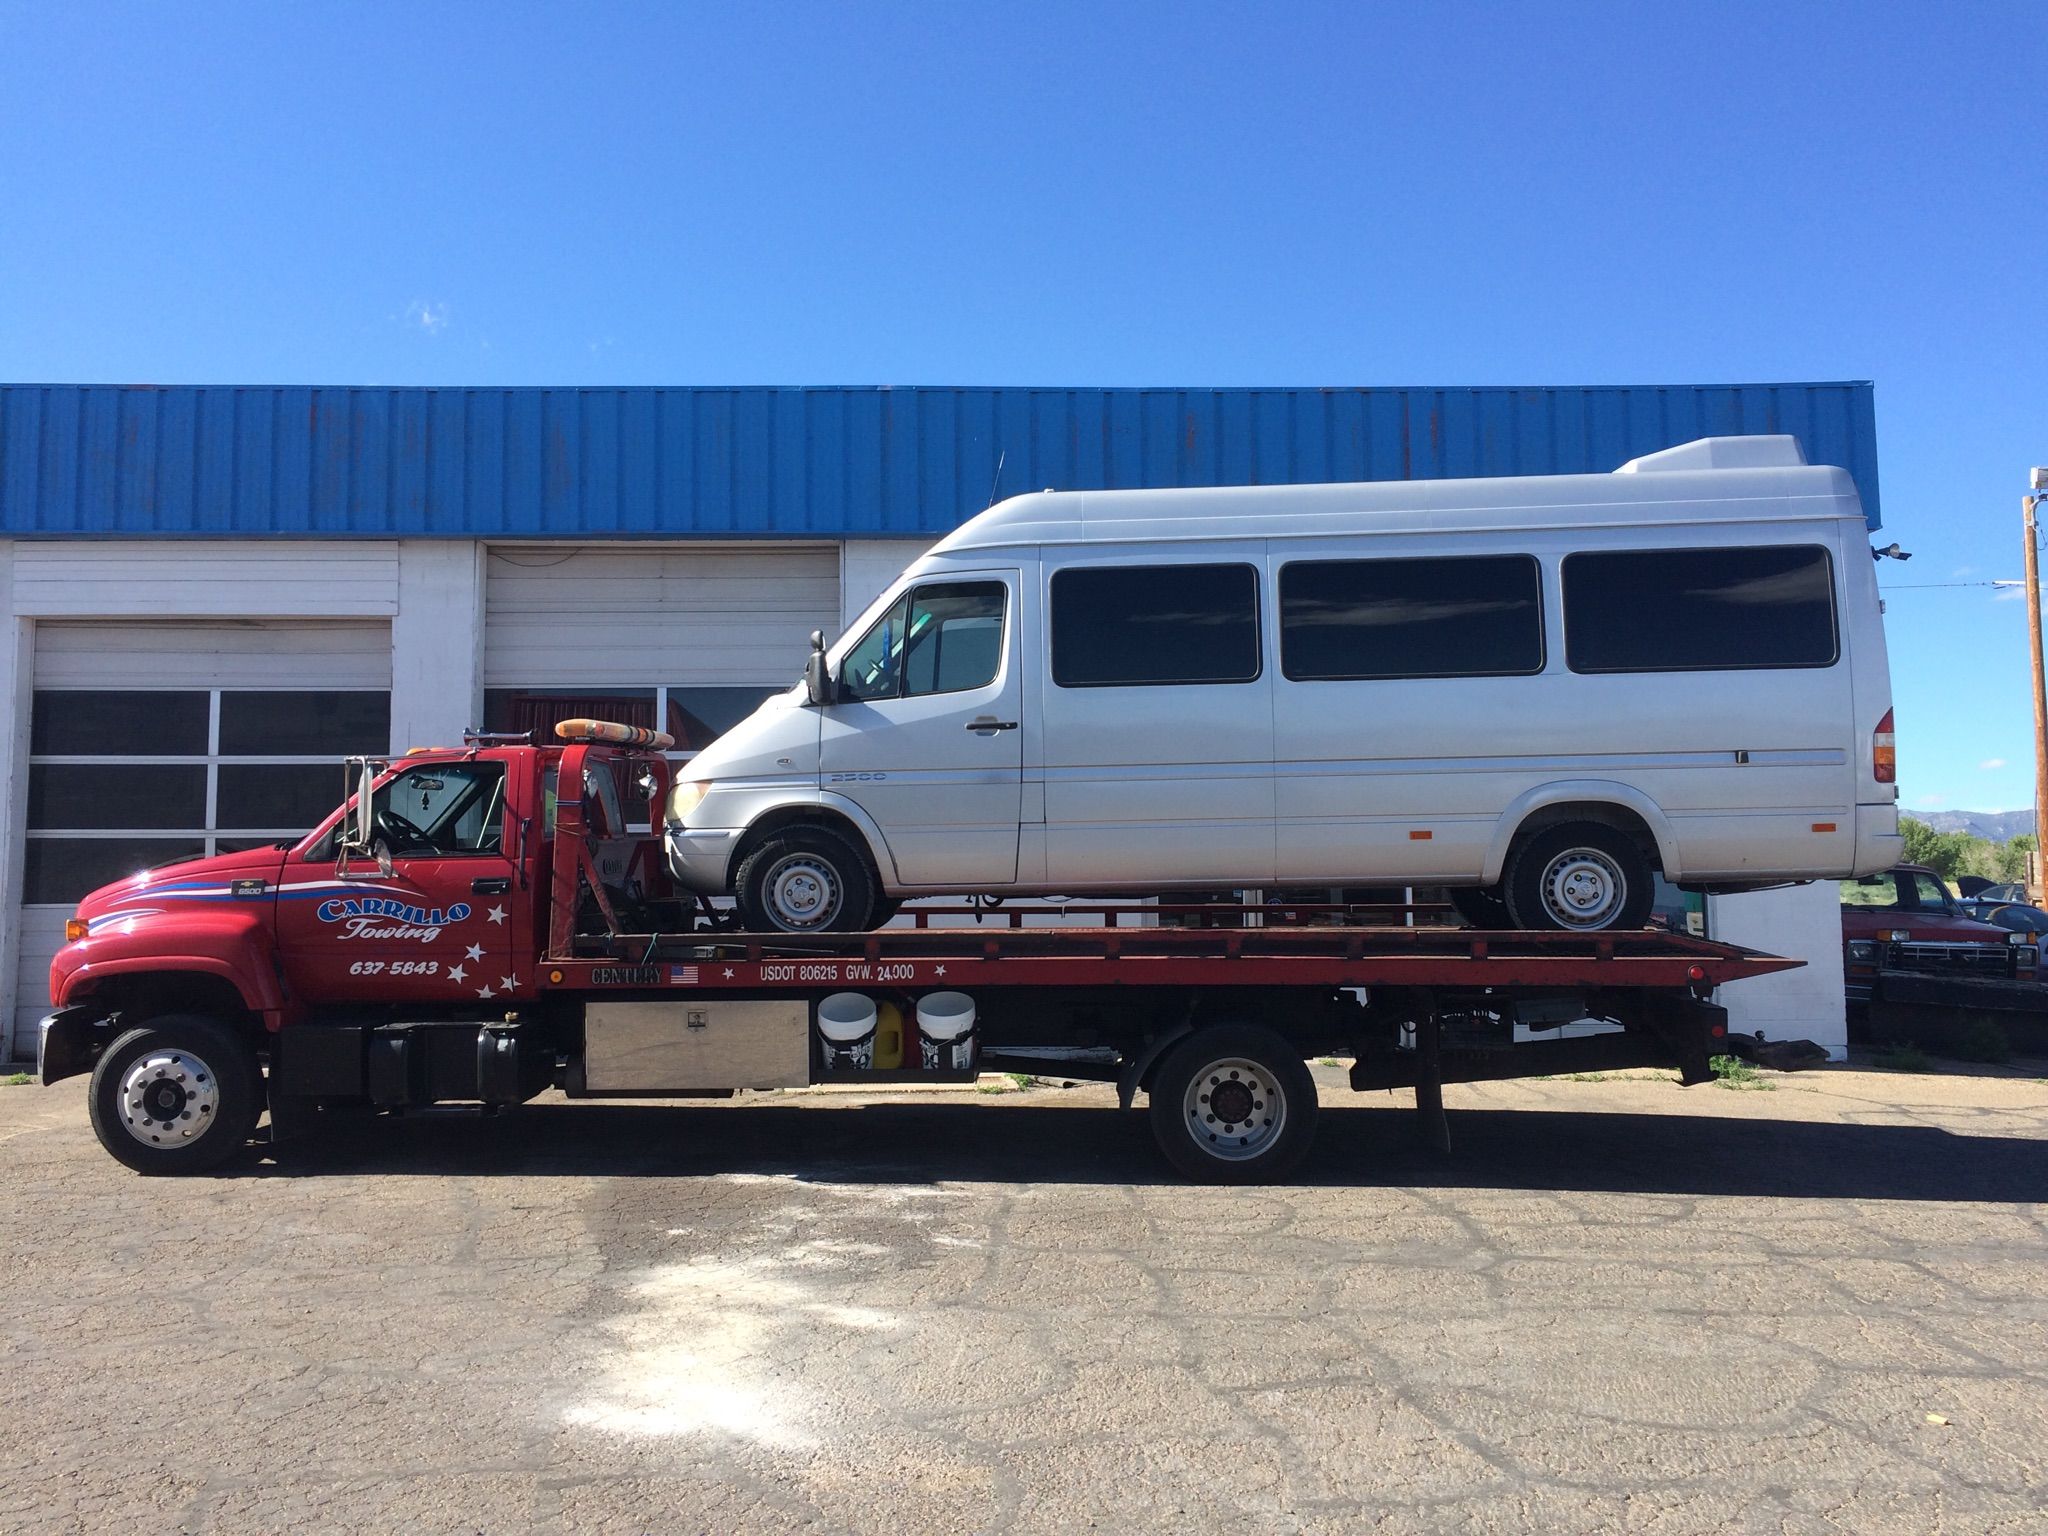 towing, wrecker service, motorcycle towing, roadside assistance, shuttle service, 21 ft flatbed towing, accept all major credit cards